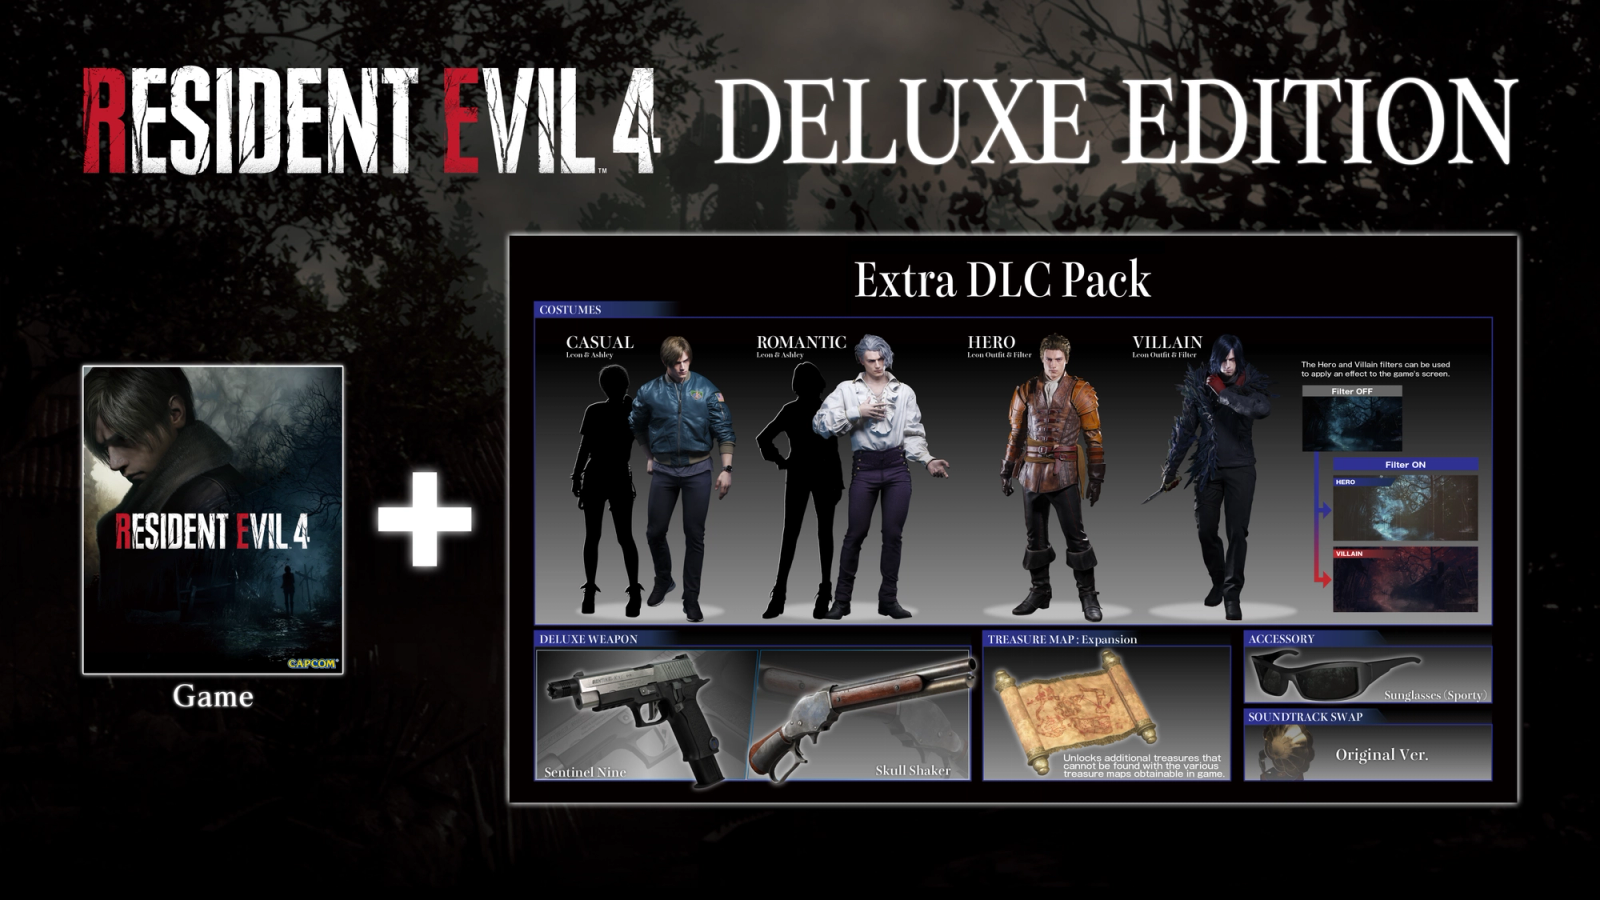 resident evil 4 deluxe edition dlc shotgun page